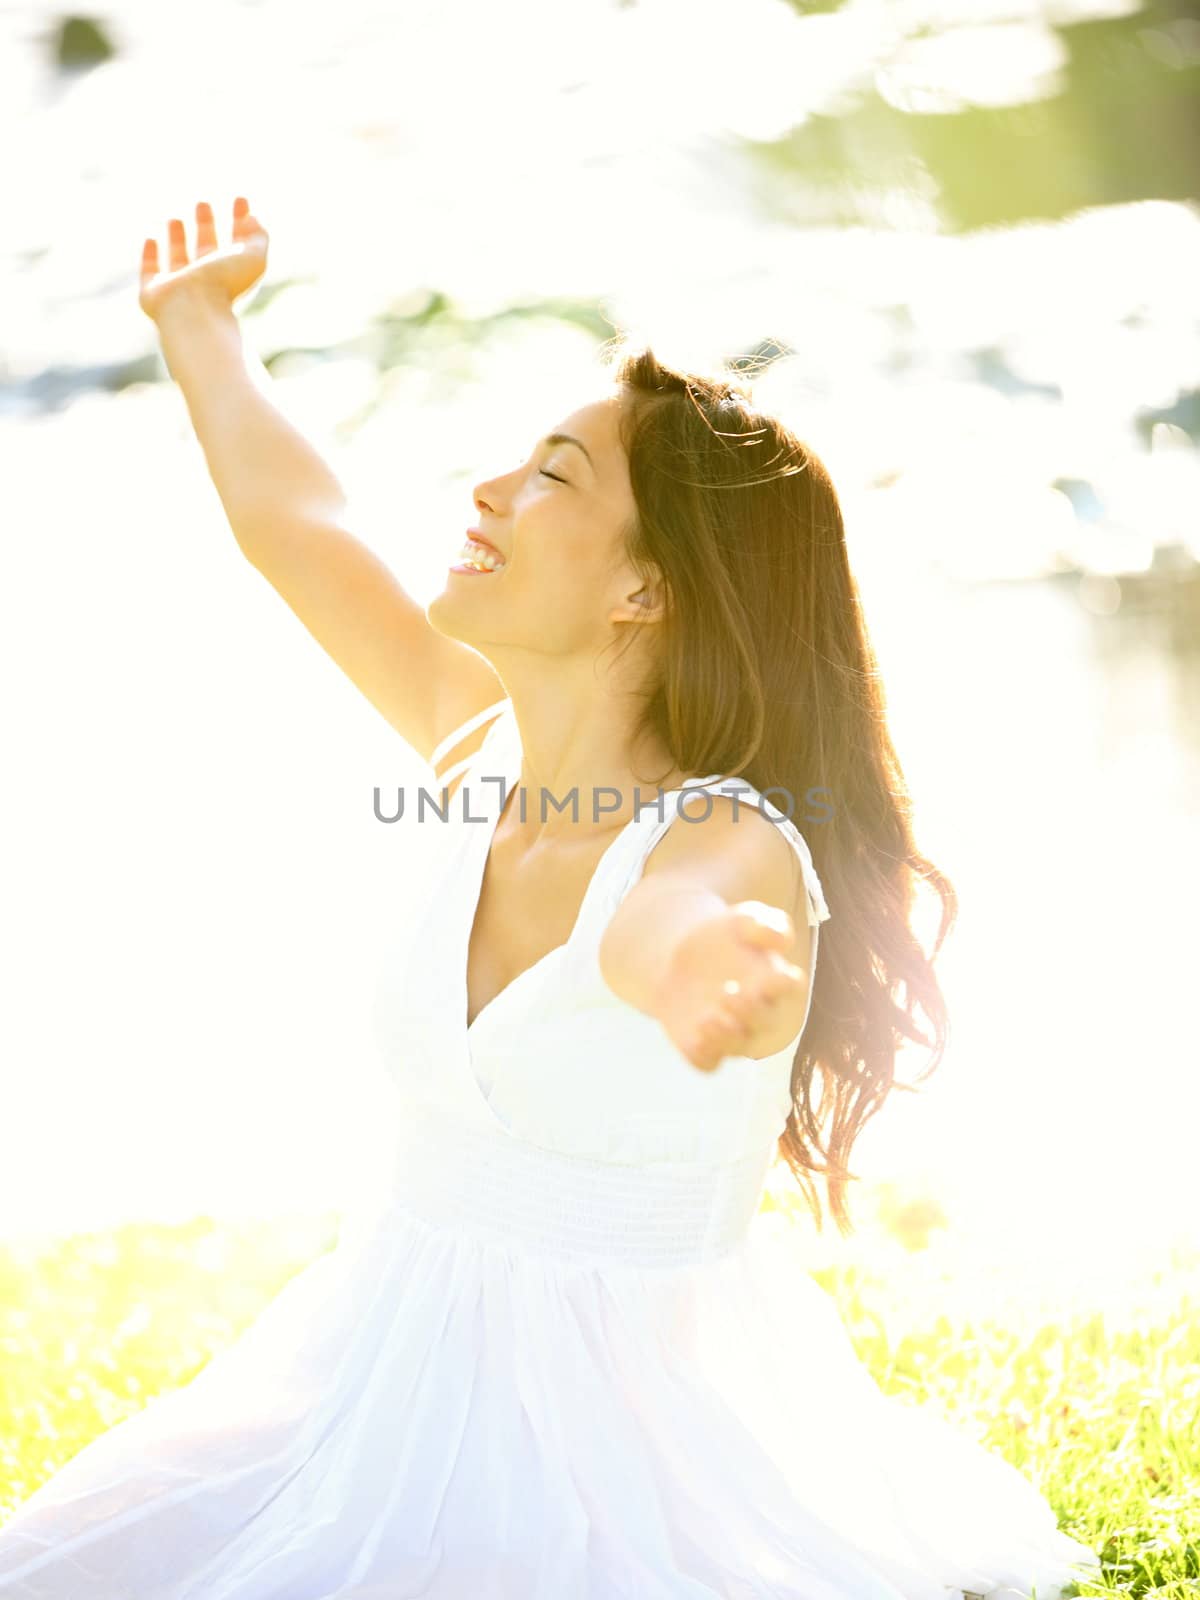 Happy free woman carefree in spring or summer with arms out enjoying the sun joyful in white summer dress sitting in the grass by lake in park. Beautiful mixed race Caucasian / Asian Chinese girl outdoors.